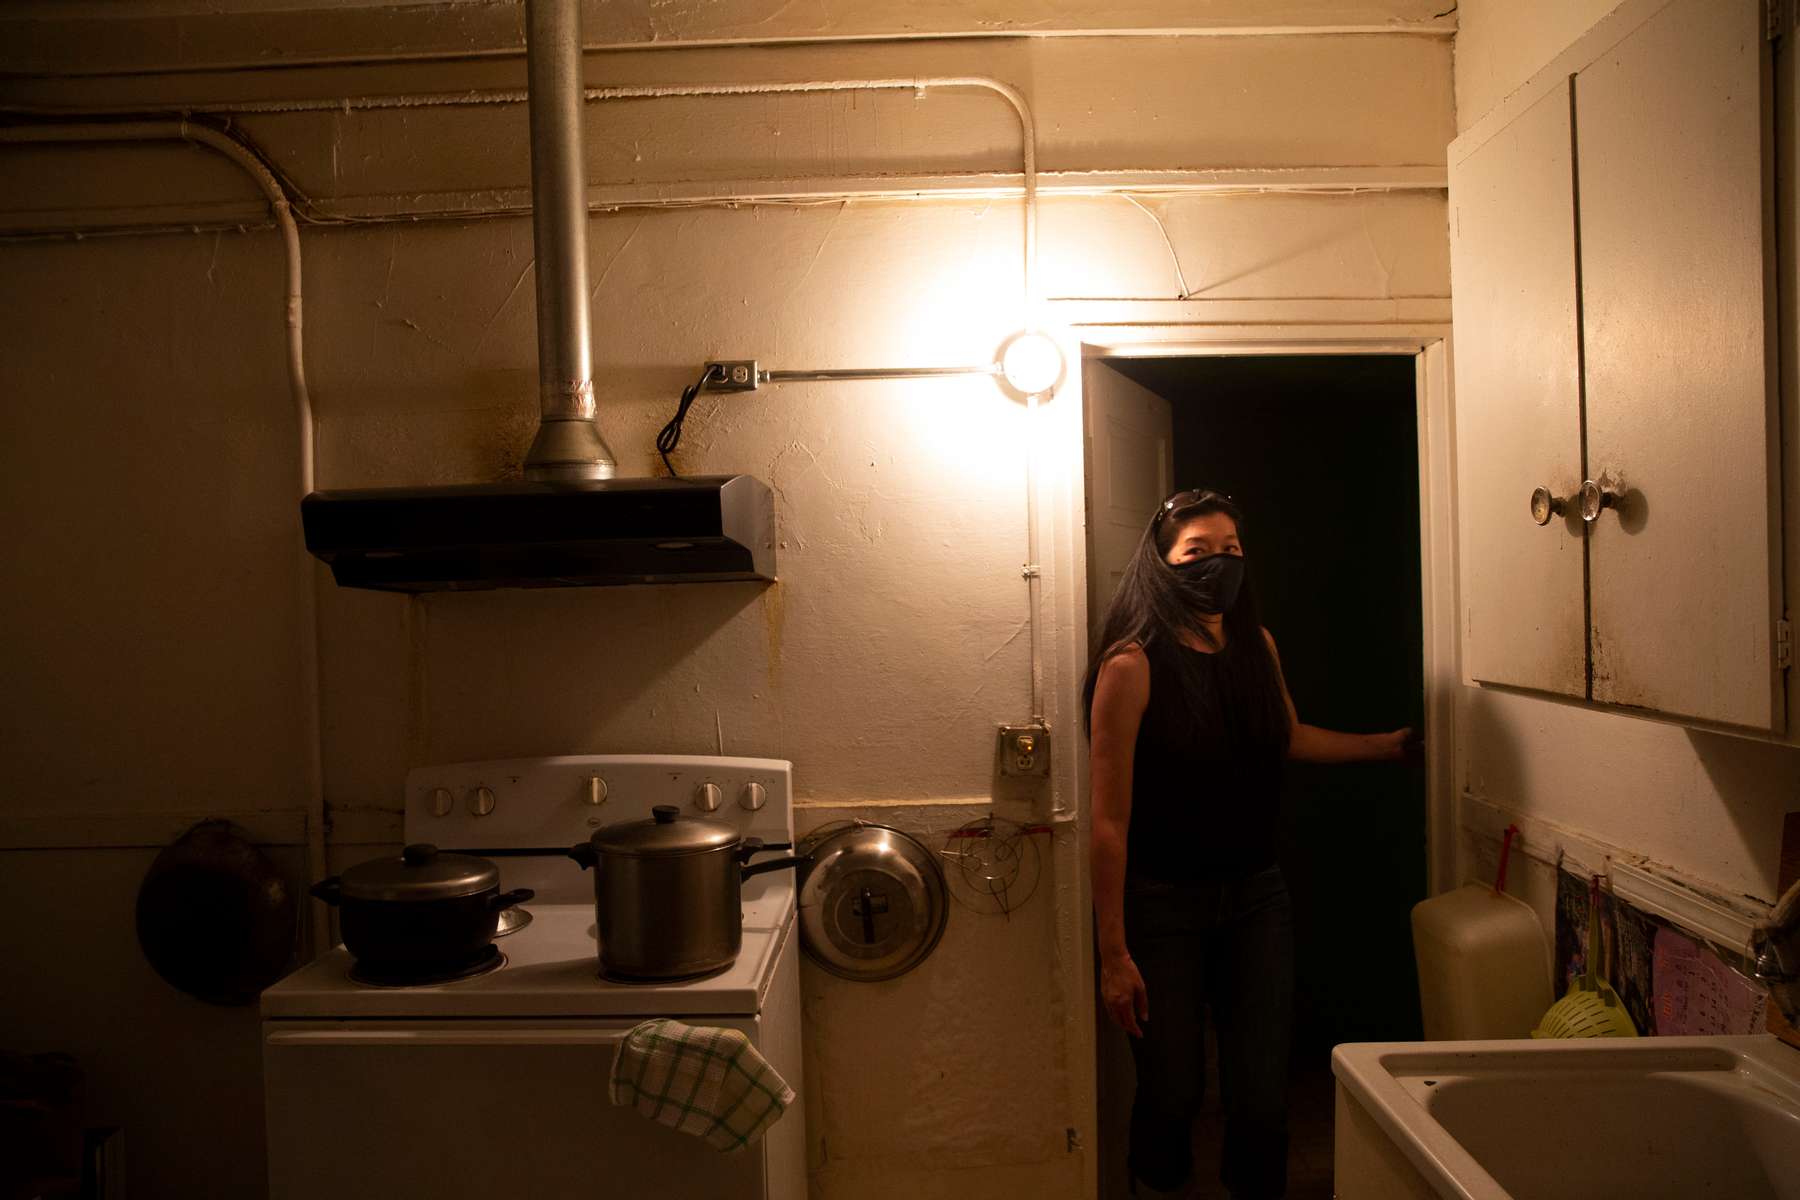 Angela Lee, stands in the kitchen of the home she grew up in in the Kong Yick Apartments  in the Chinatown - International District in Seattle, Washington on July 15, 2020. The apartment now belongs to her aunt. Donnie Chin, director of the International District Emergency Center (IDEC) was murdered on July 23, 2015. The murderer was never found. (Photo by Karen Ducey)